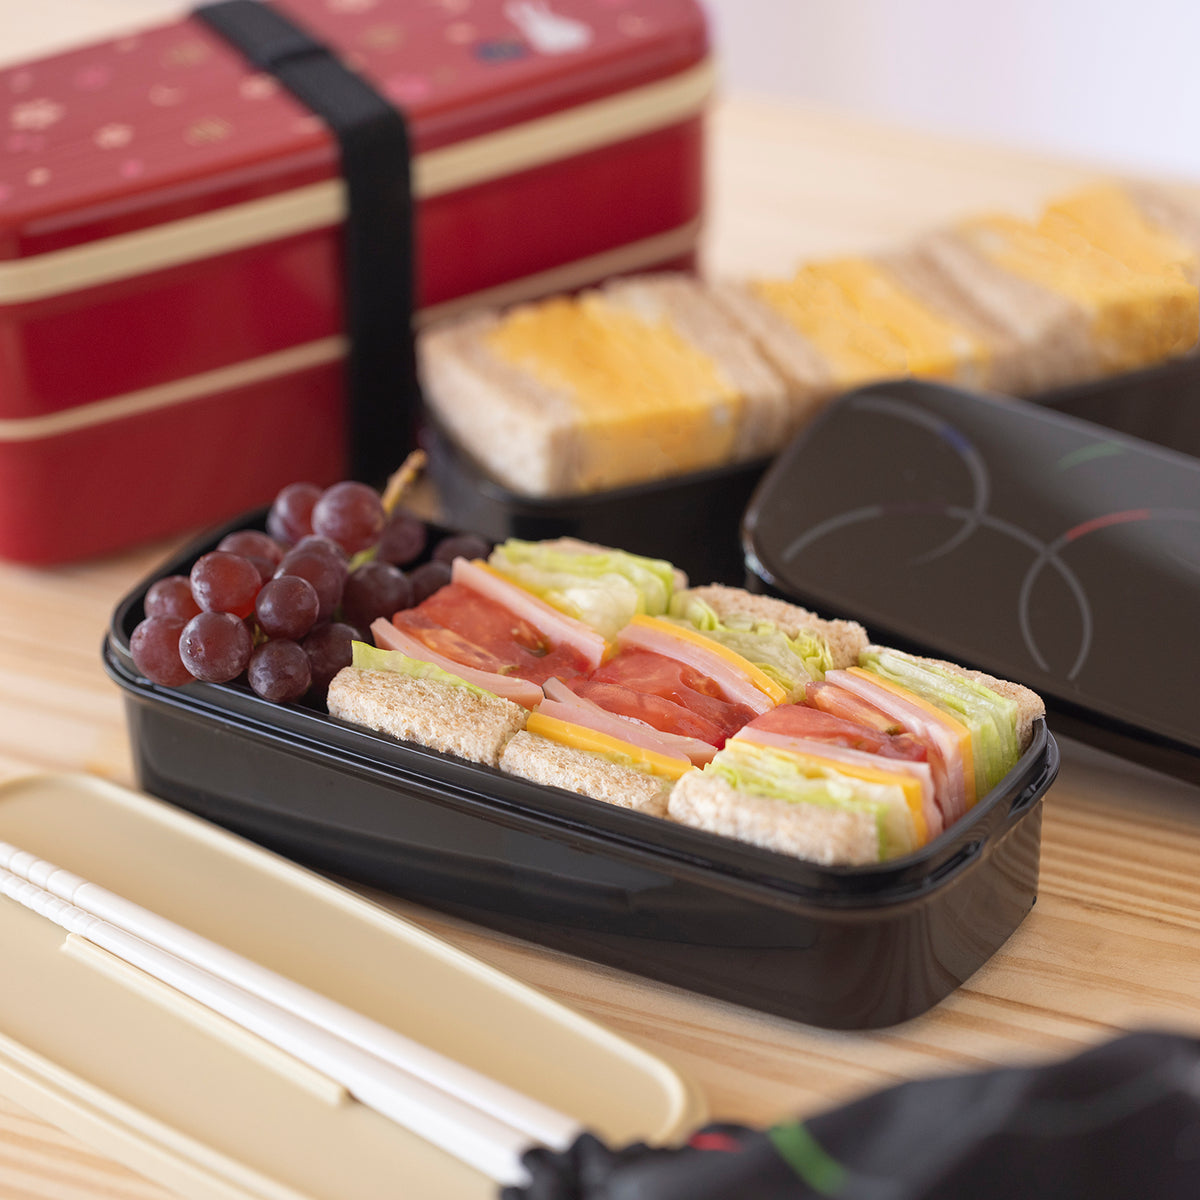 2 Tier Lunch Box Bento Box Avec Sac Lunch & Couverts, Botes Lunch